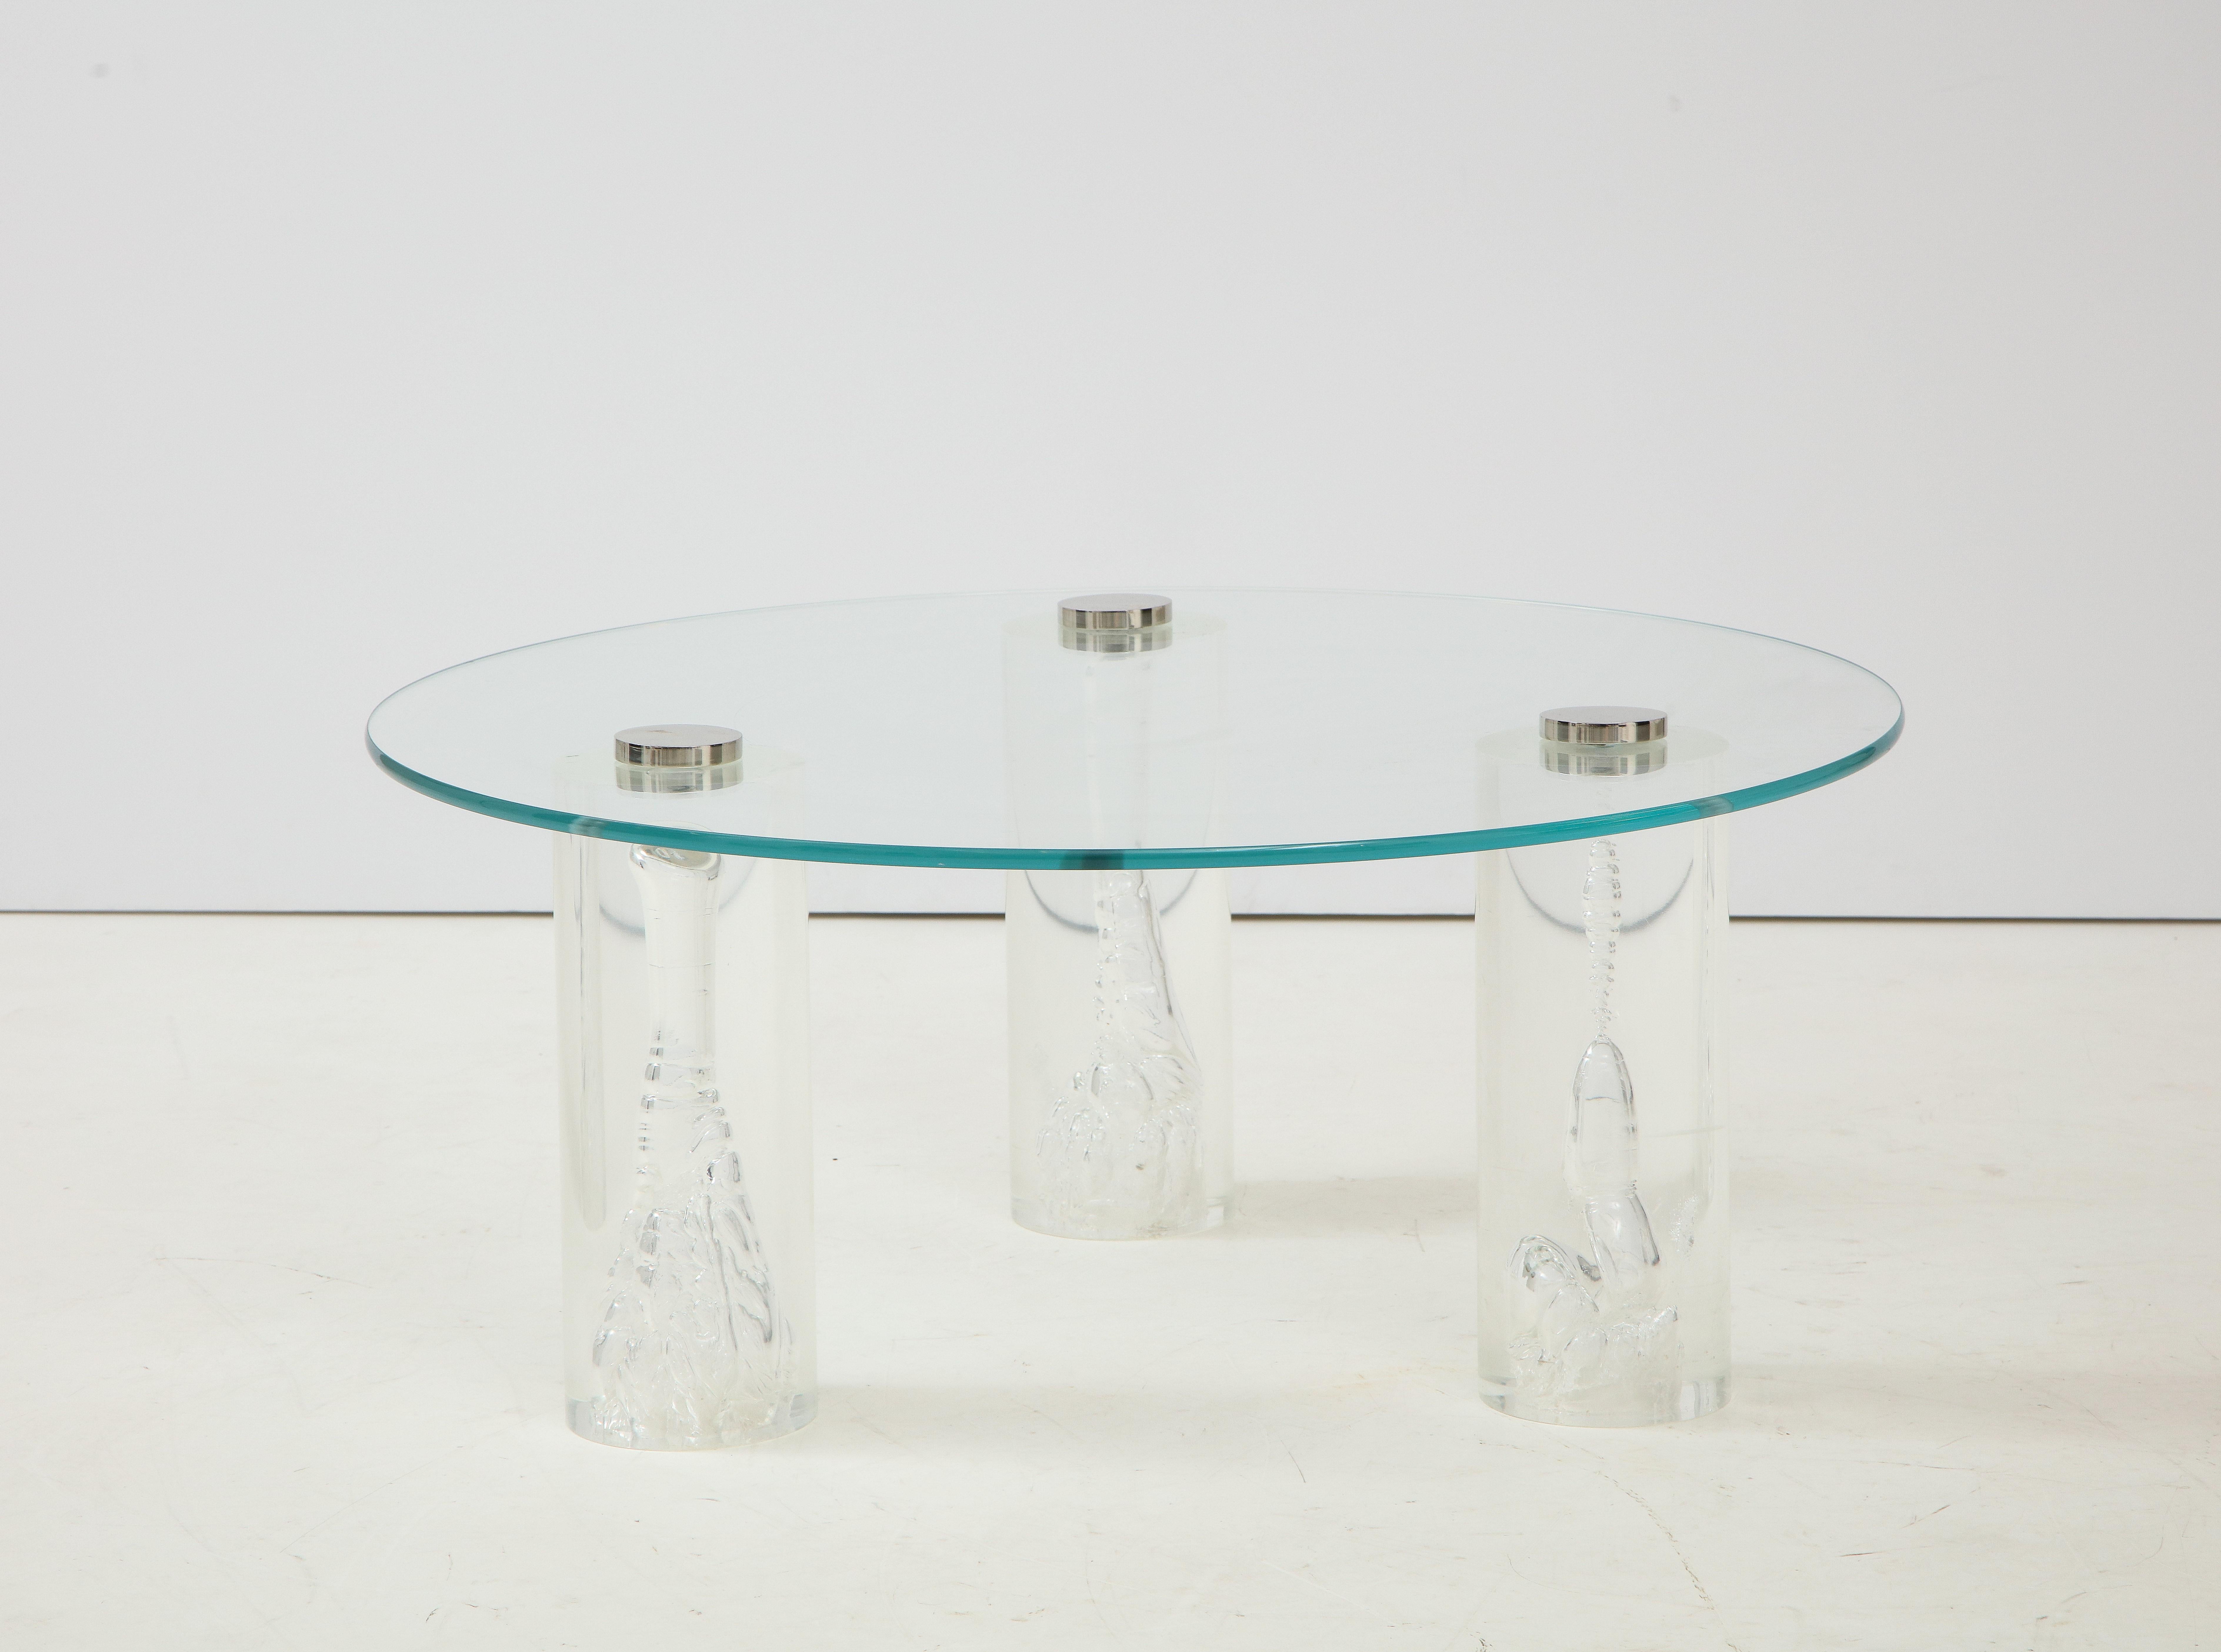 1980's Lucite and glass coffee table.
The lucite columns have wonderful internal bubbles randomly achieved during the 
pouring of the lucite to make each column unique.
Each leg supports the glass top with a polished chrome disc.